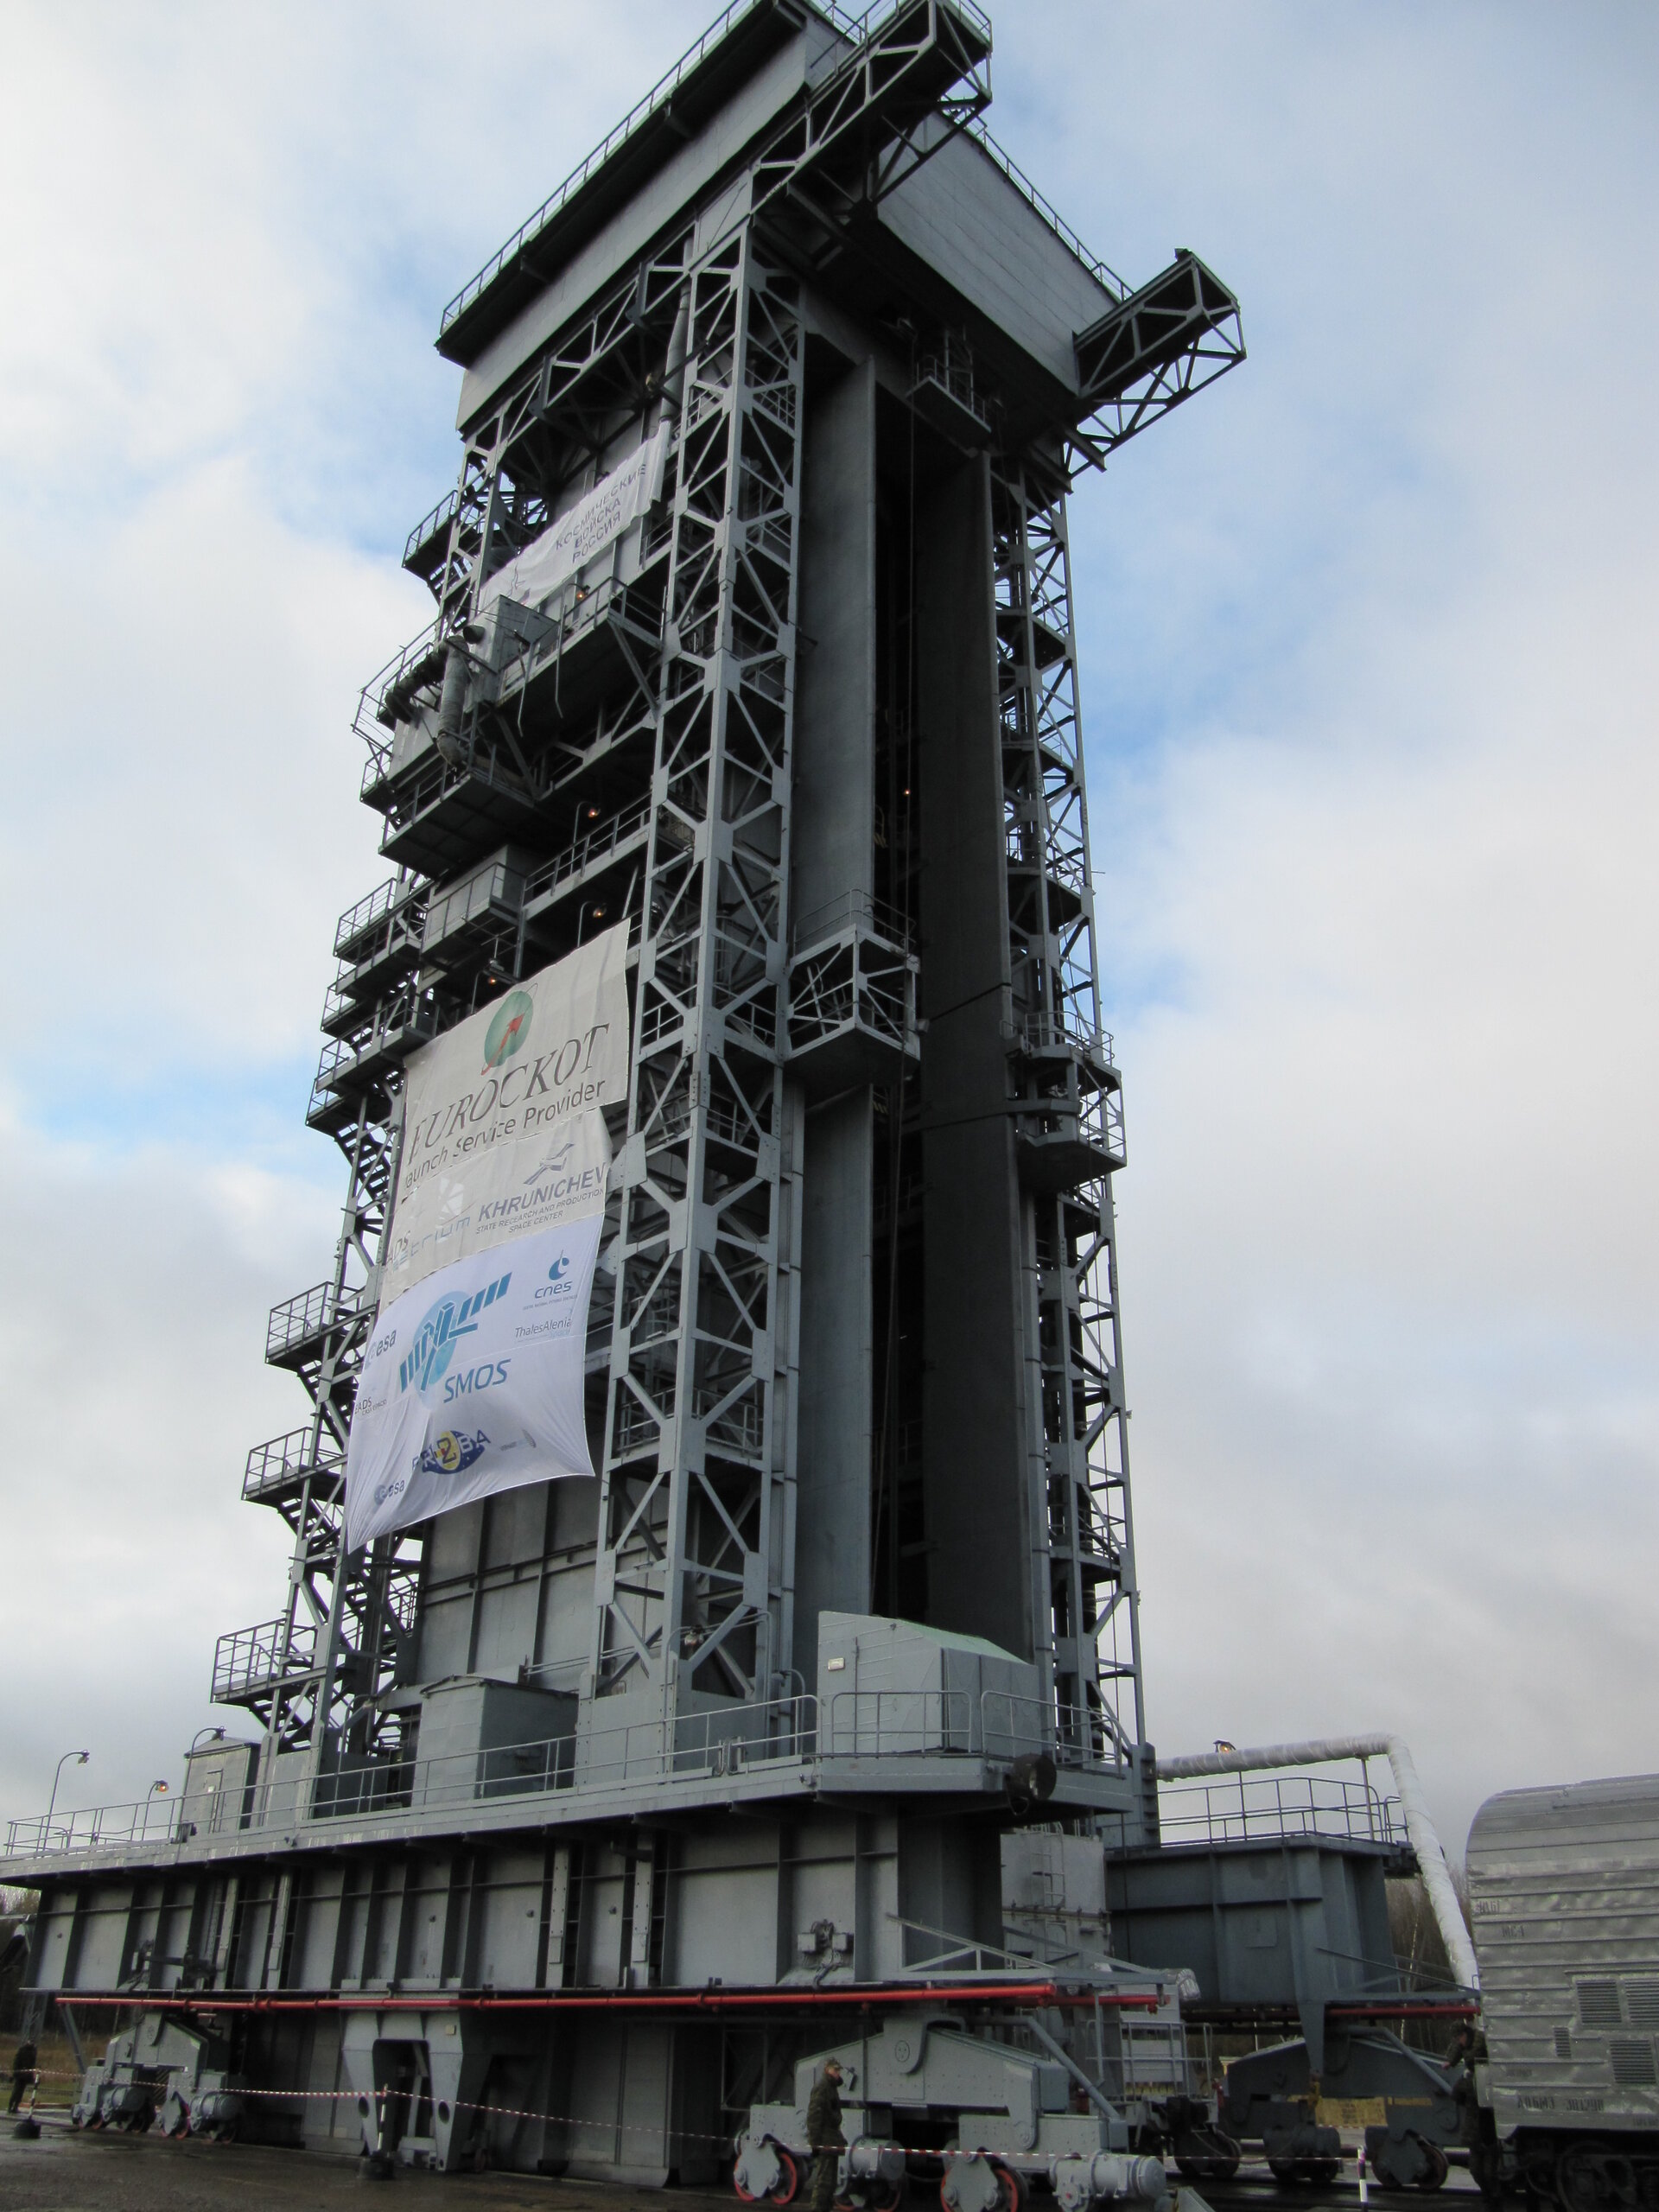 SMOS launch tower with banners